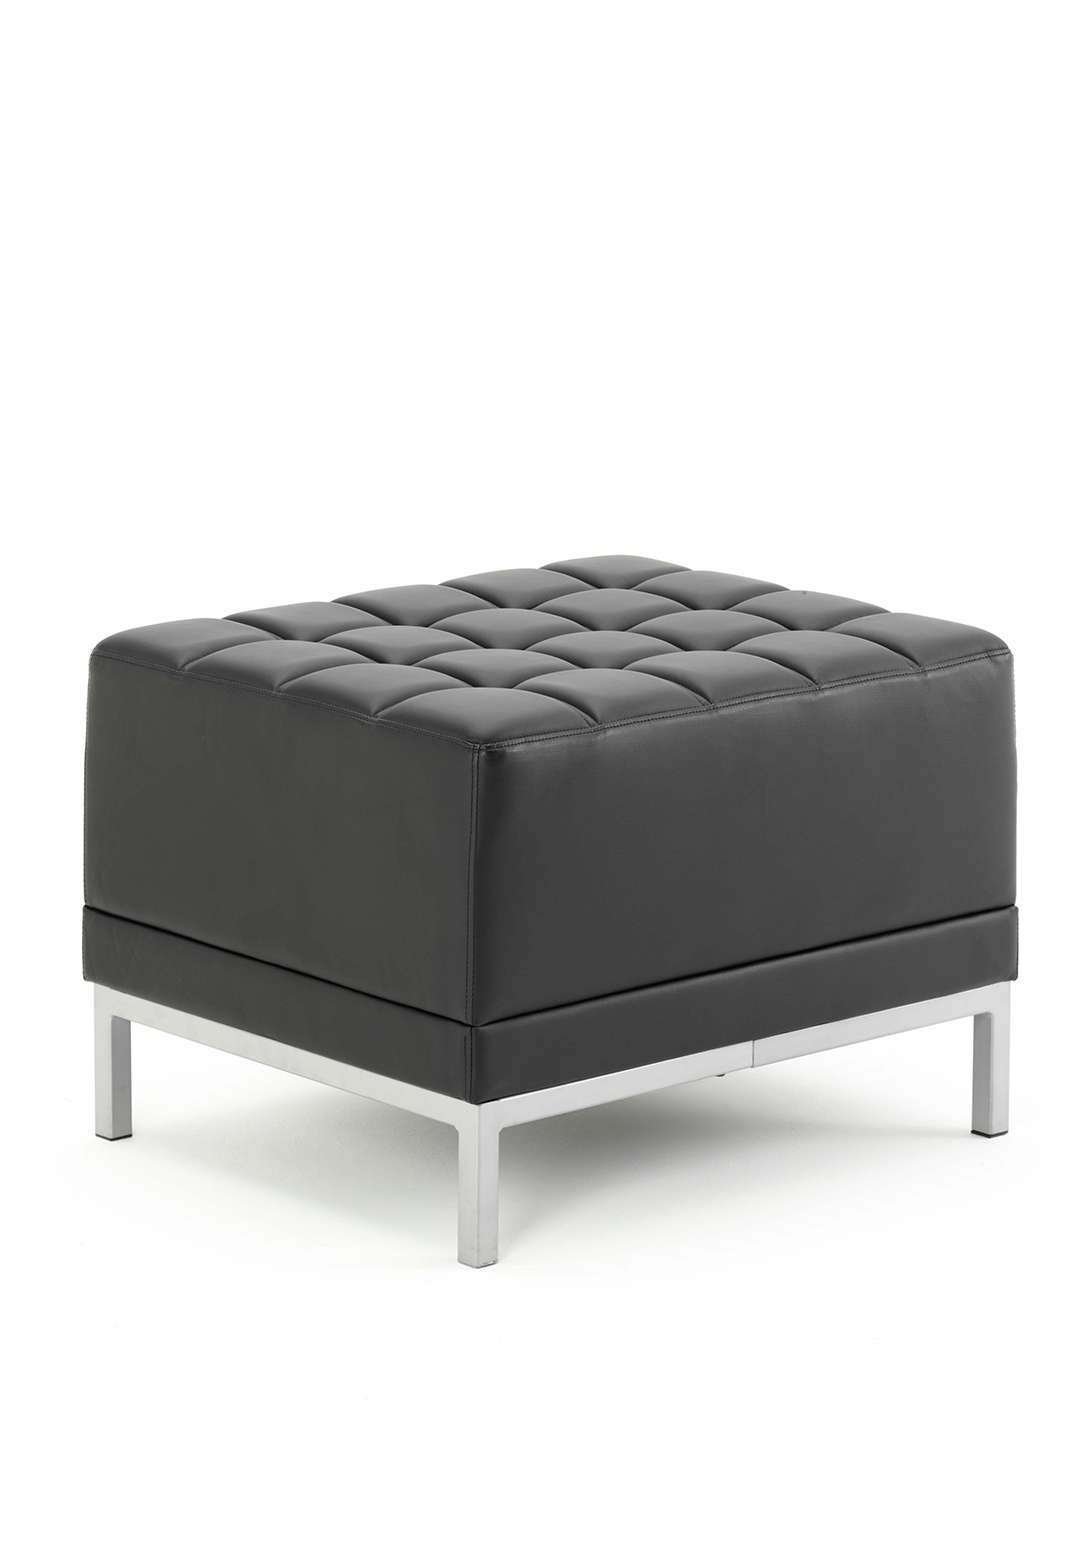 Infinity Modular Cube Chair Black Soft Bonded Leather